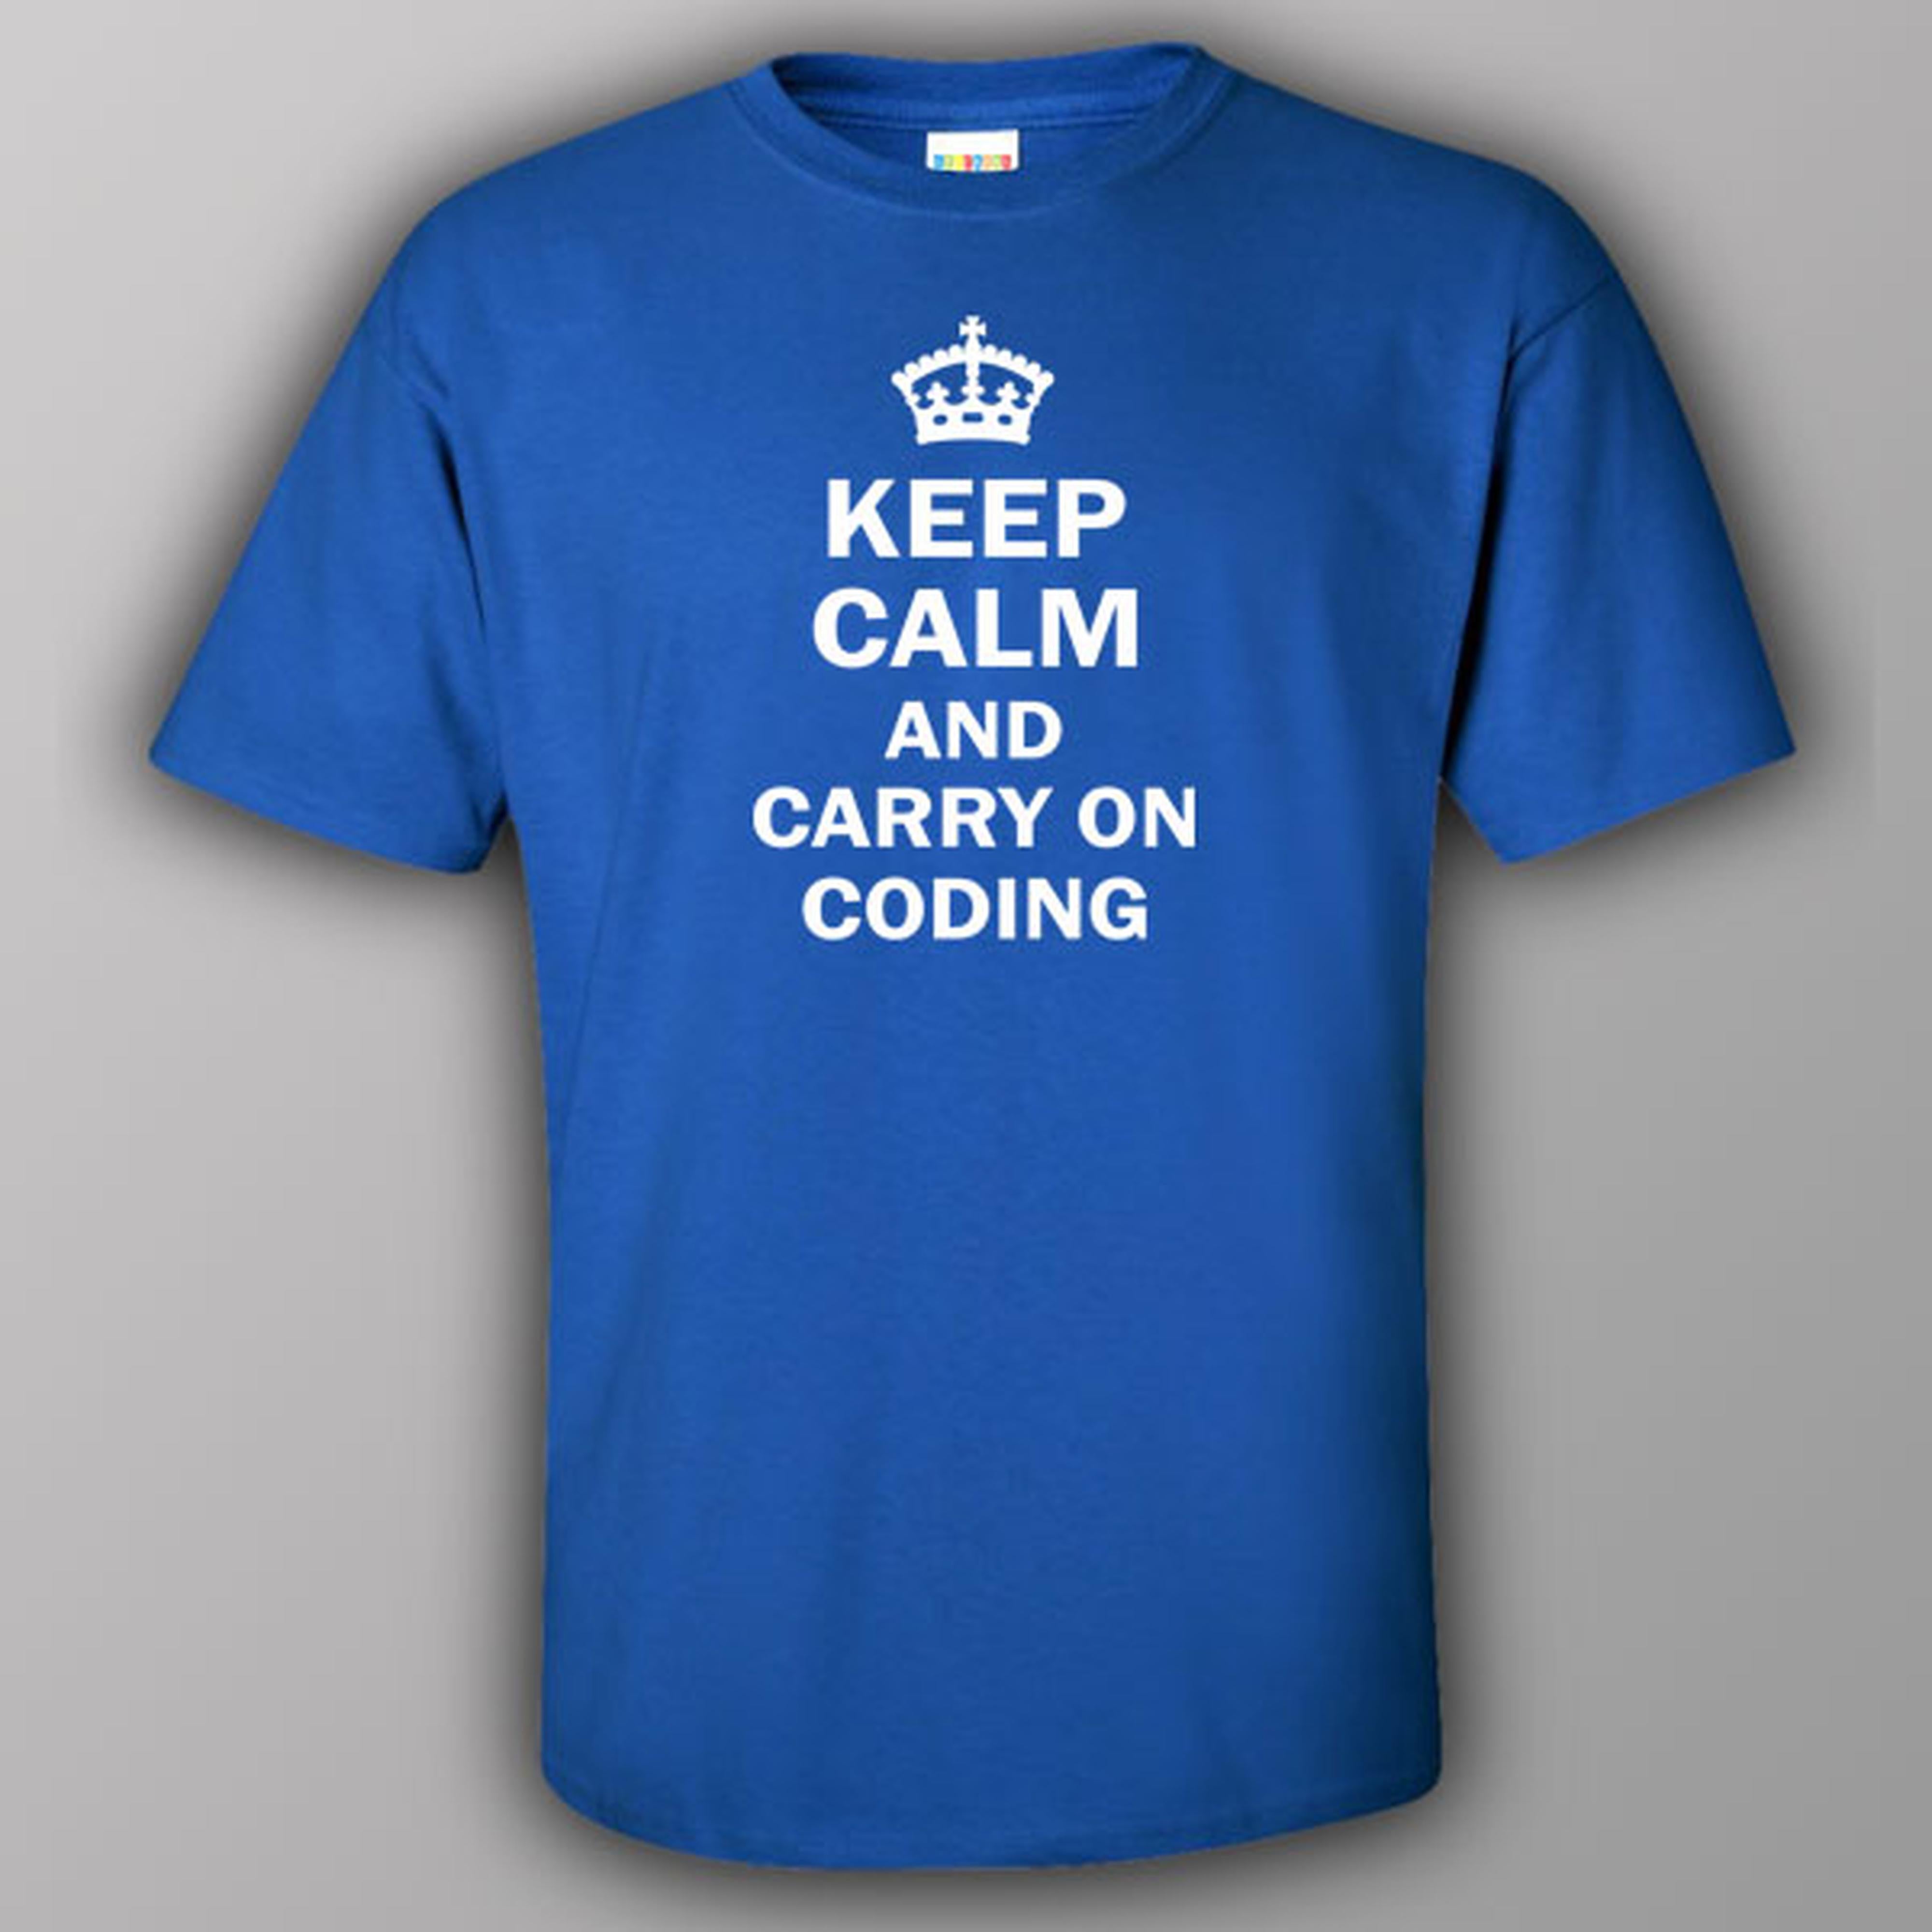 Keep calm and carry on coding - T-shirt